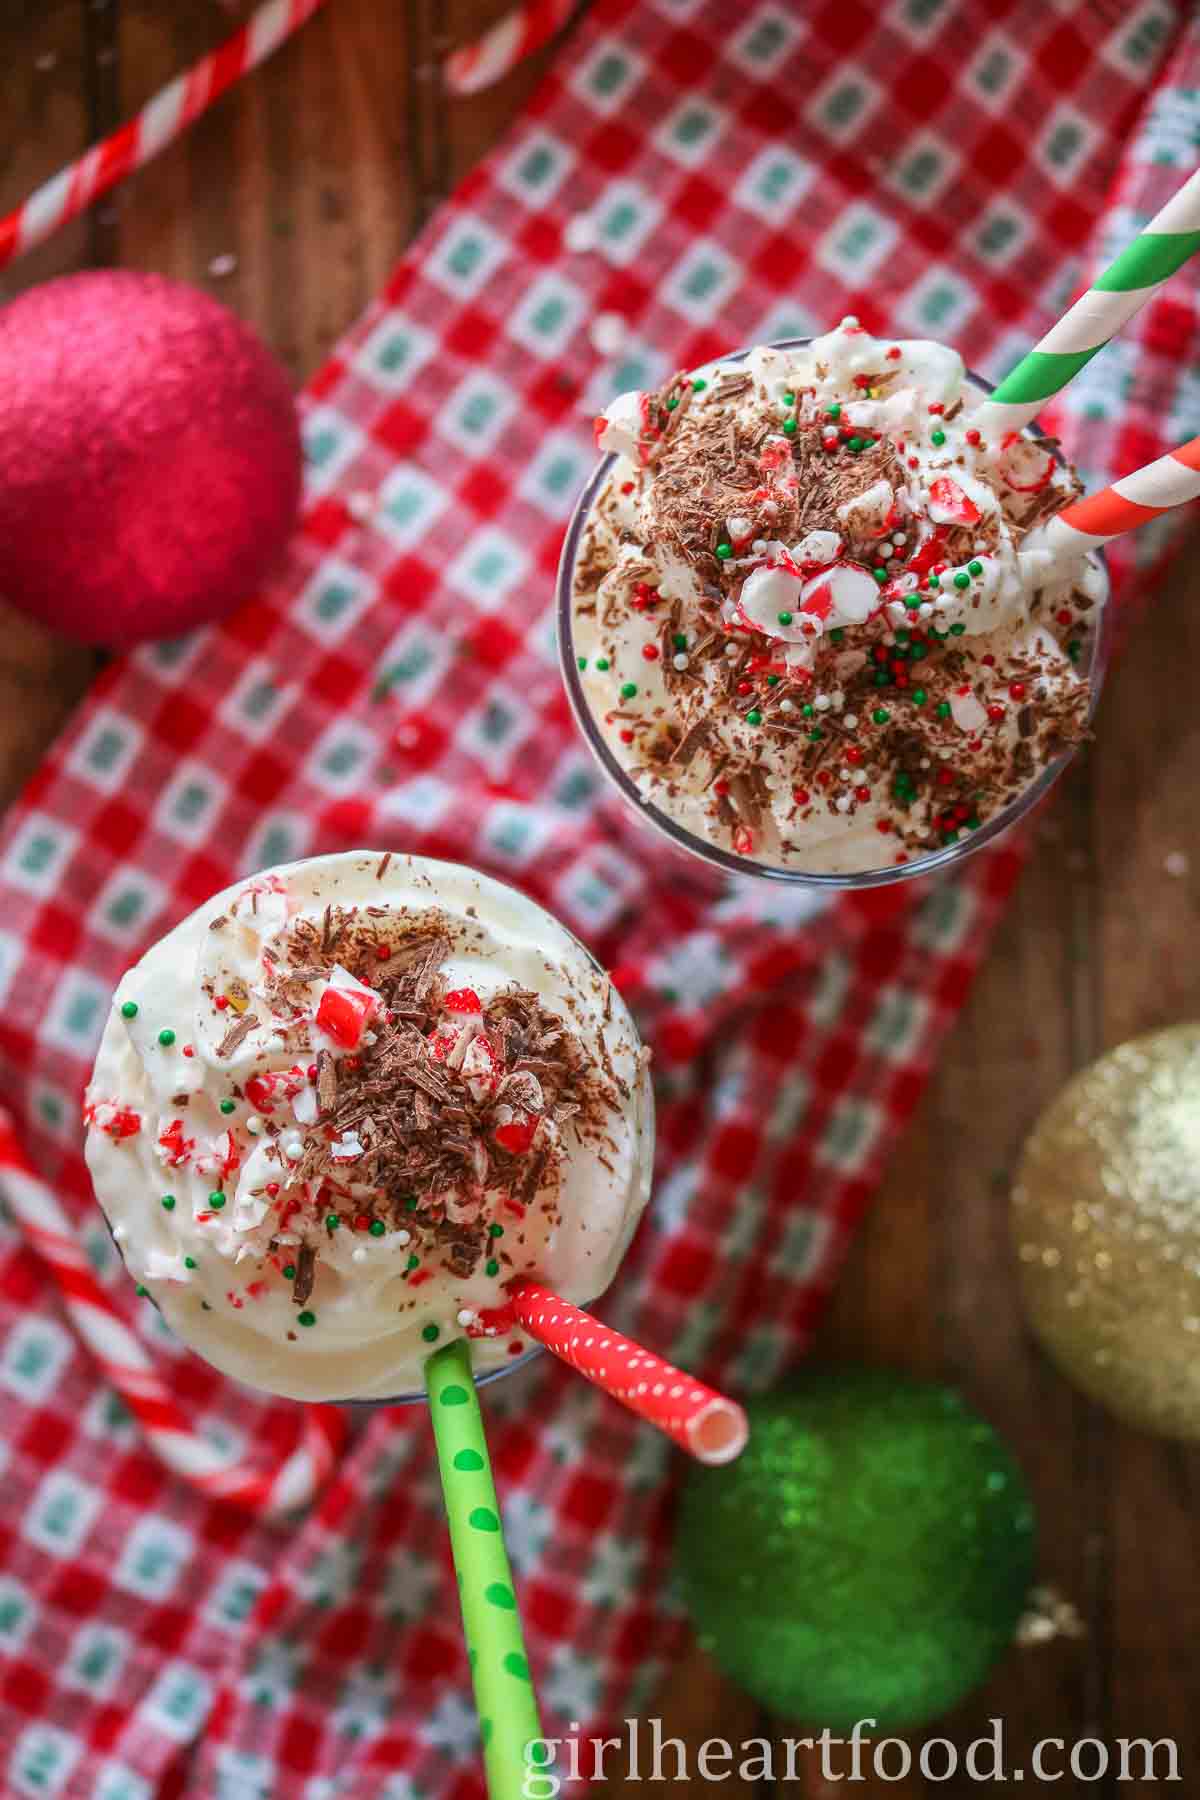 Overhead shot of two glasses of candy cane milkshake with whipped cream and toppings.